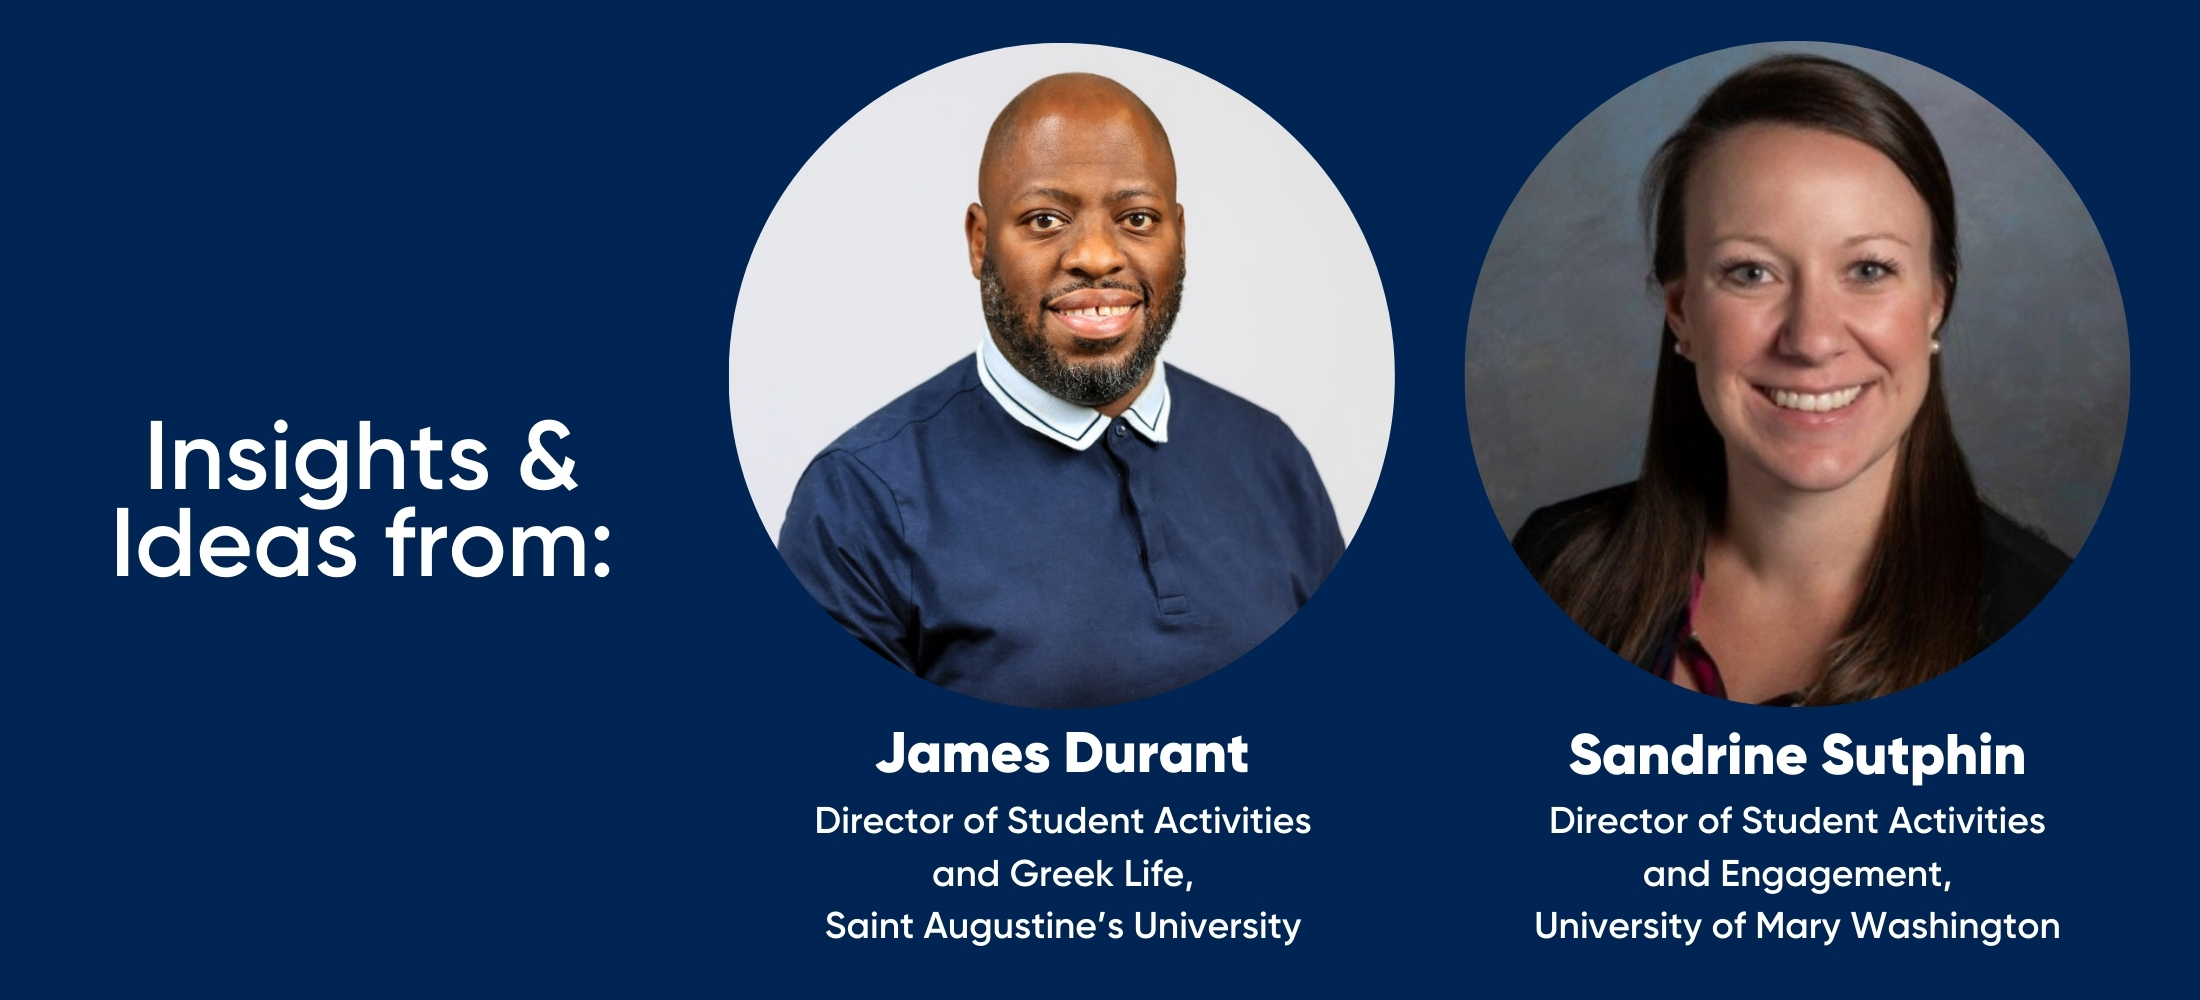 image showing the headshots of James Durant and Sandrine Sutphin. James is listed as the Director of Student Activities and Greek Life at Saint Augustine’s University and Sandrine is the Director of Student Activities and Engagement at the University of Mary Washington